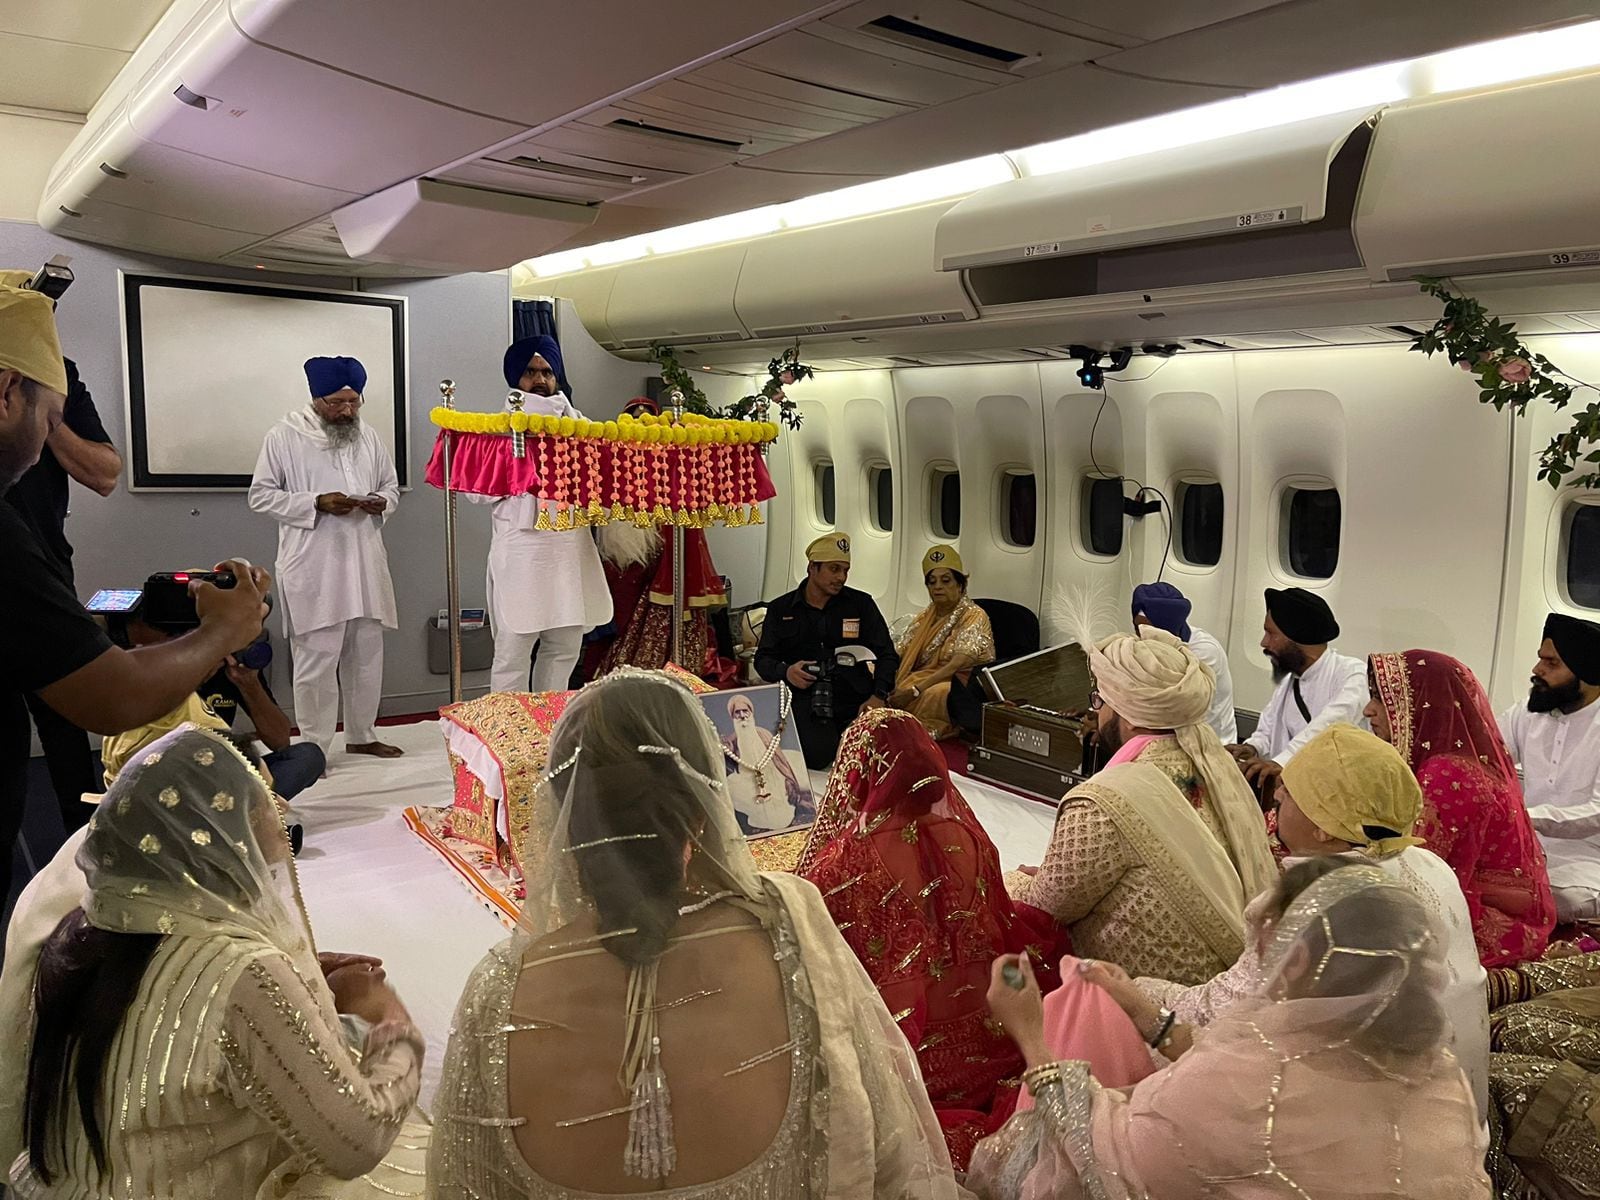 indian jewellery heiress ties the knot in lavish 'wedding in the sky'